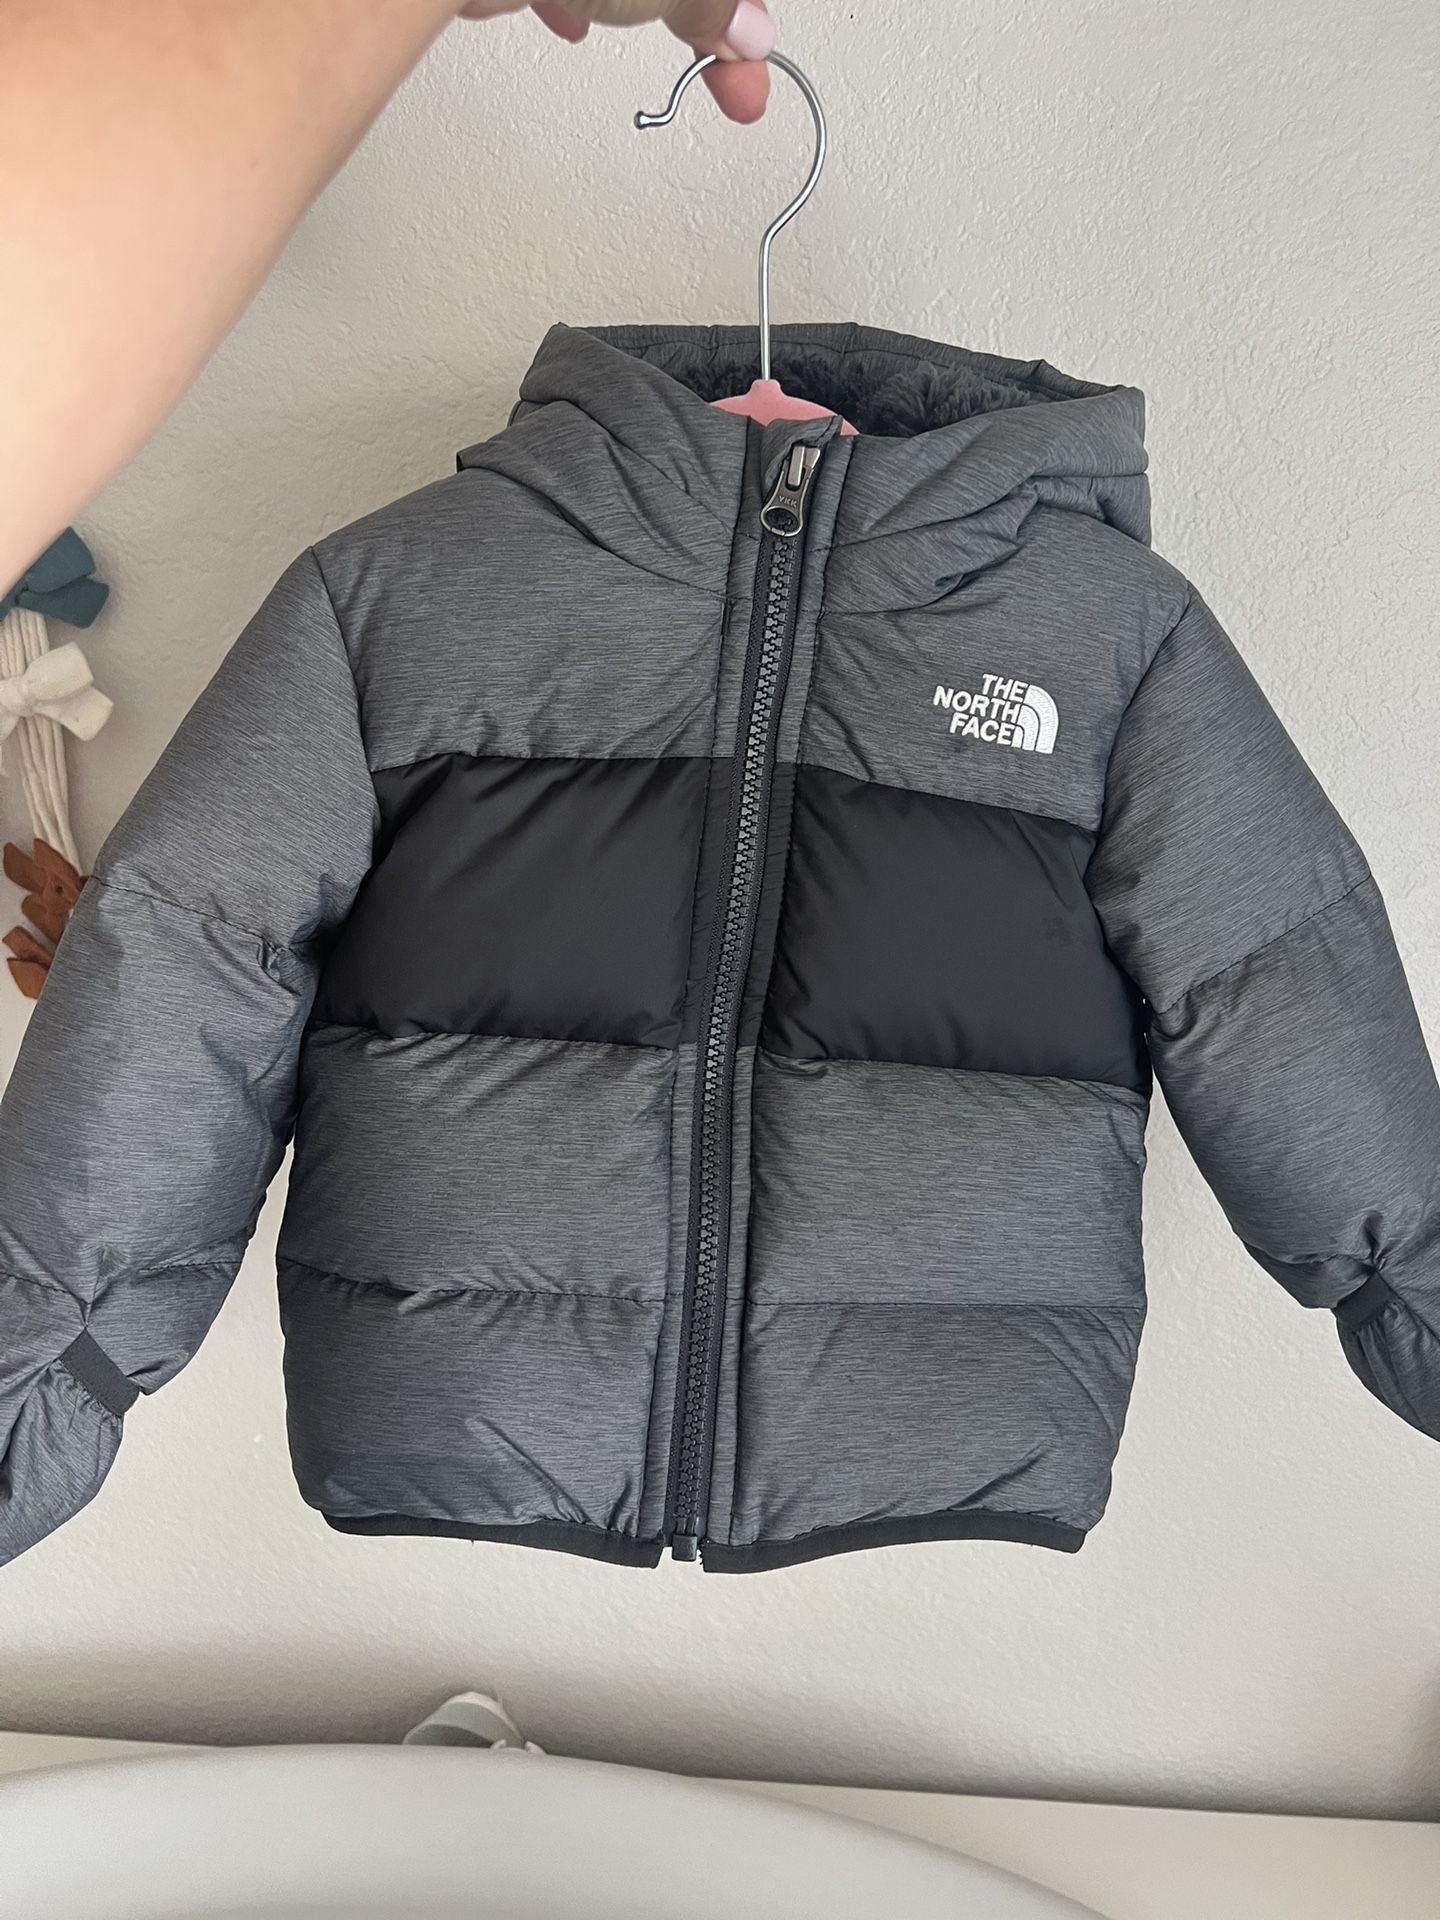 The North Face Jacket 12-18 Months